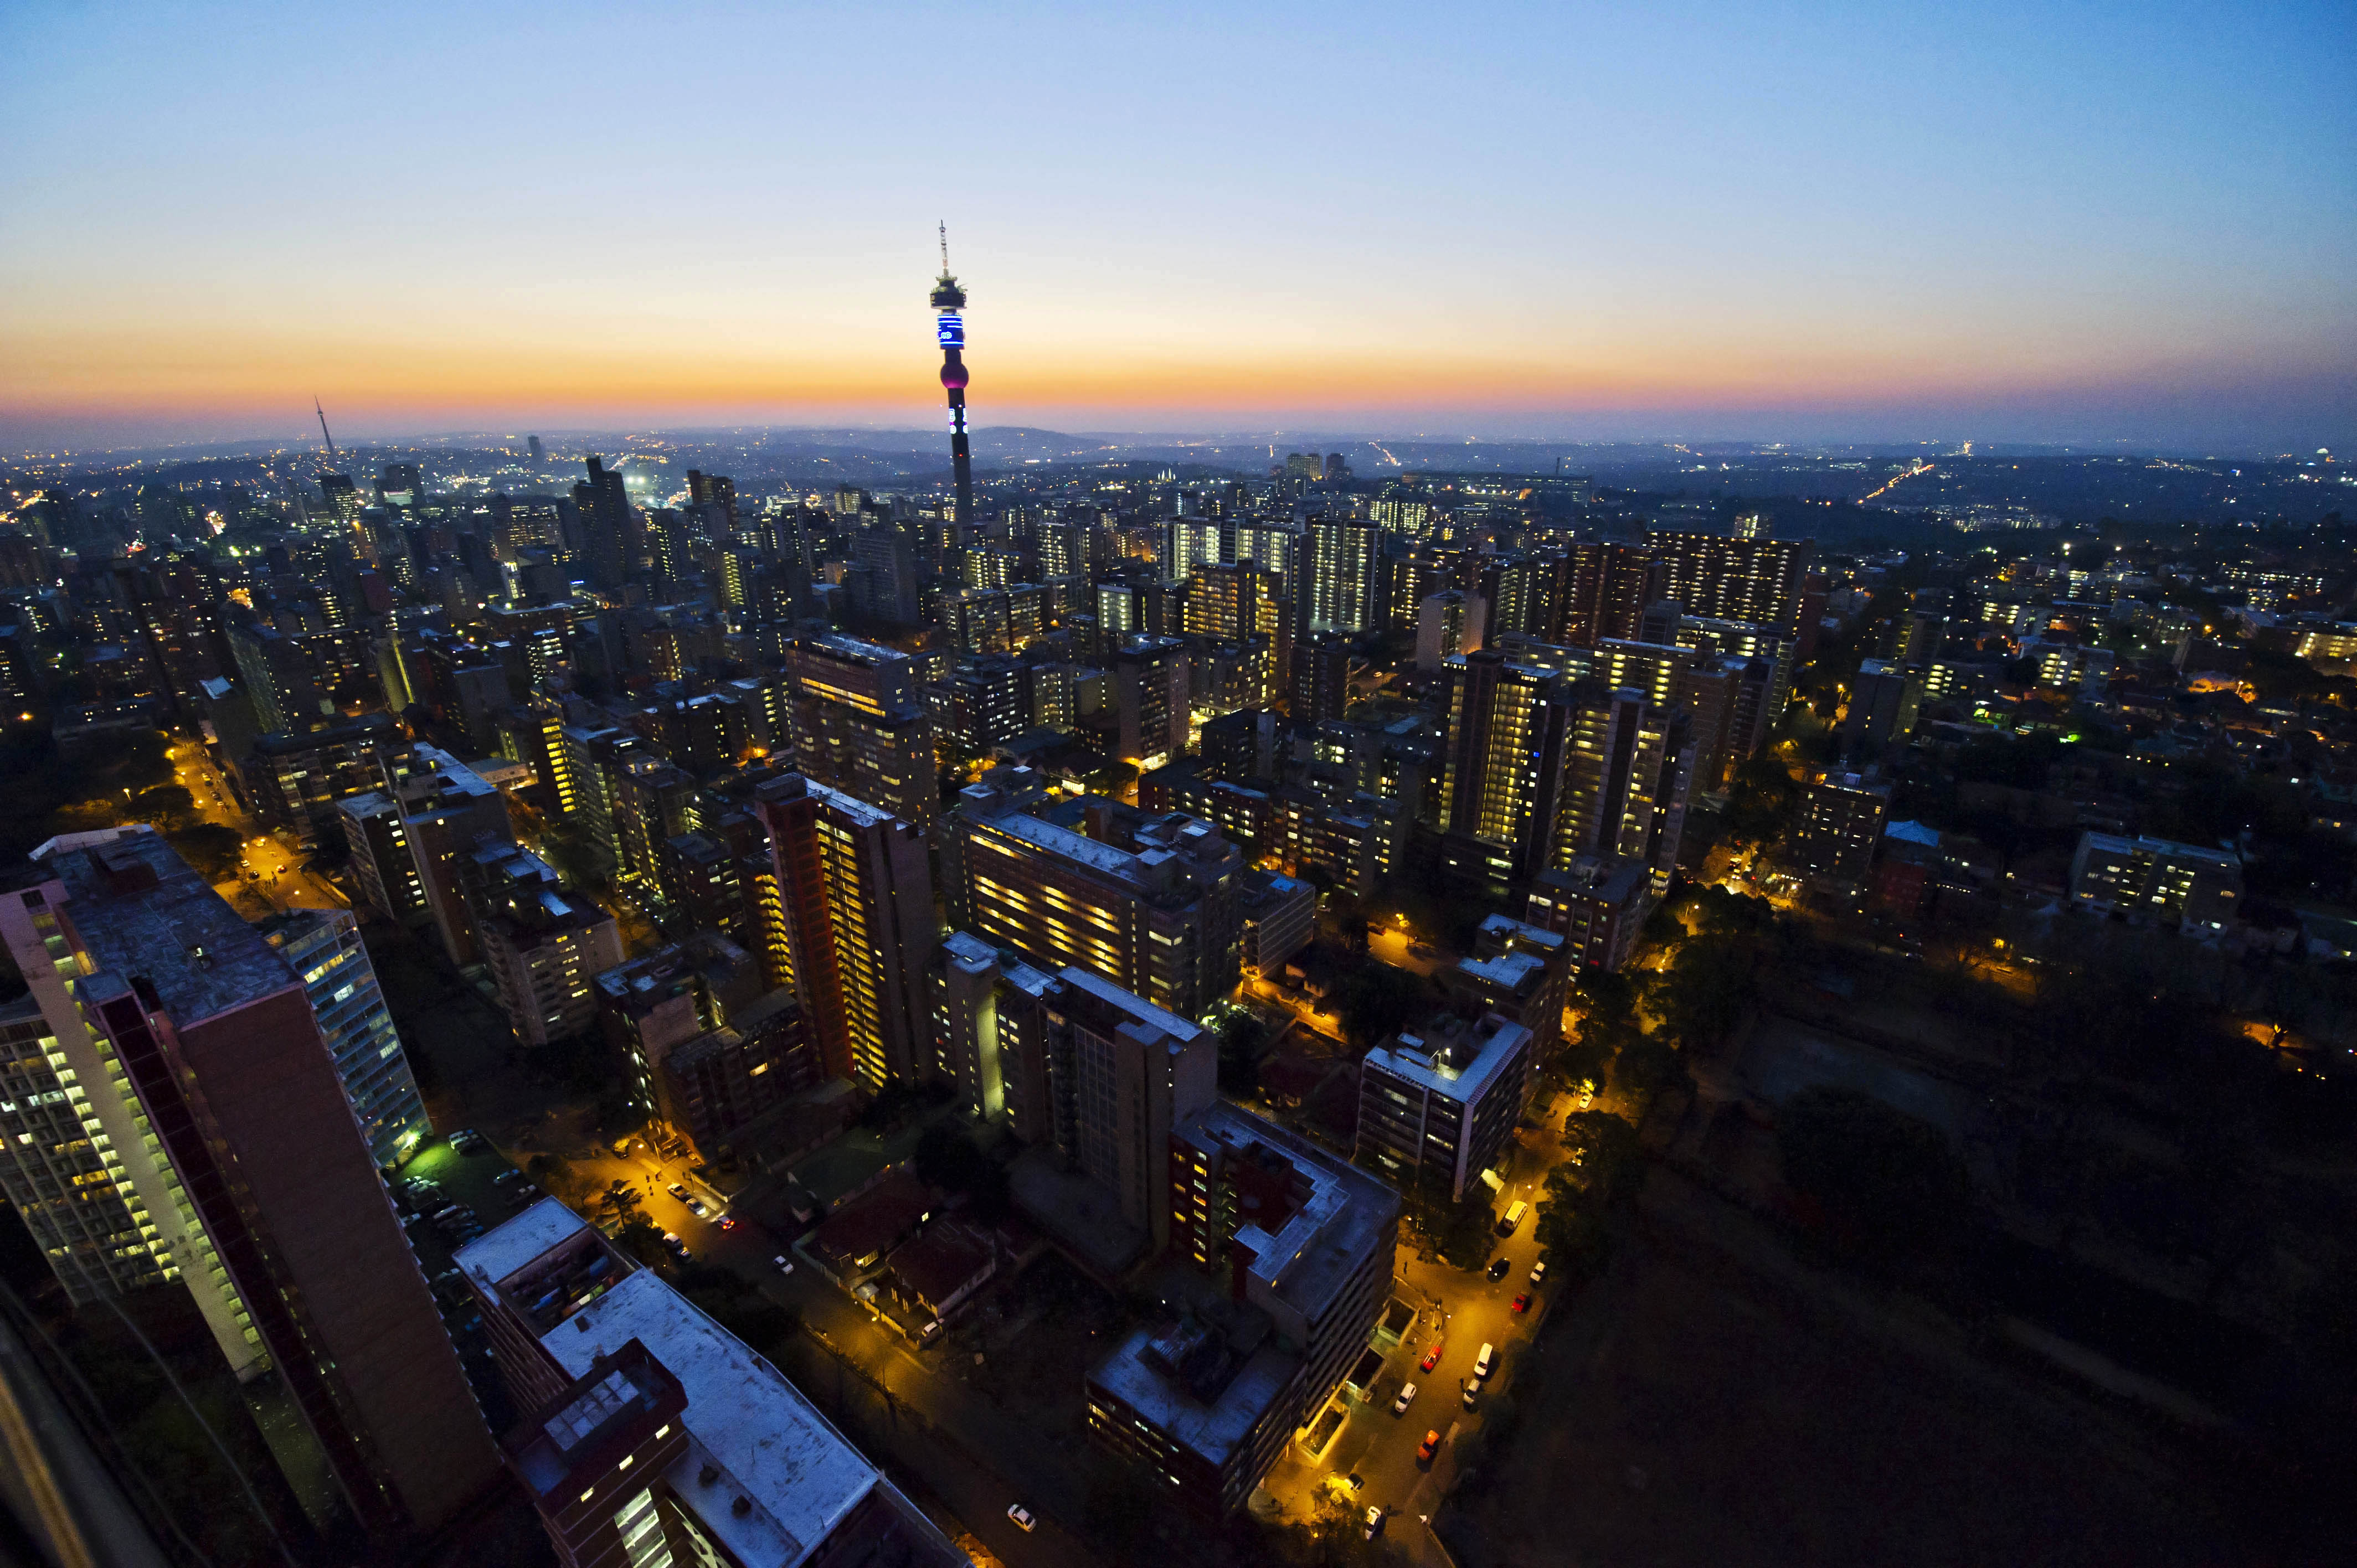 JOHANNESBURG, SOUTH AFRICA - JULY 2: Johannesburg Skyline at night from the Ponte City on July 2, 2012. (Photo by Gallo Images / Foto24 / Nelius Rademan)